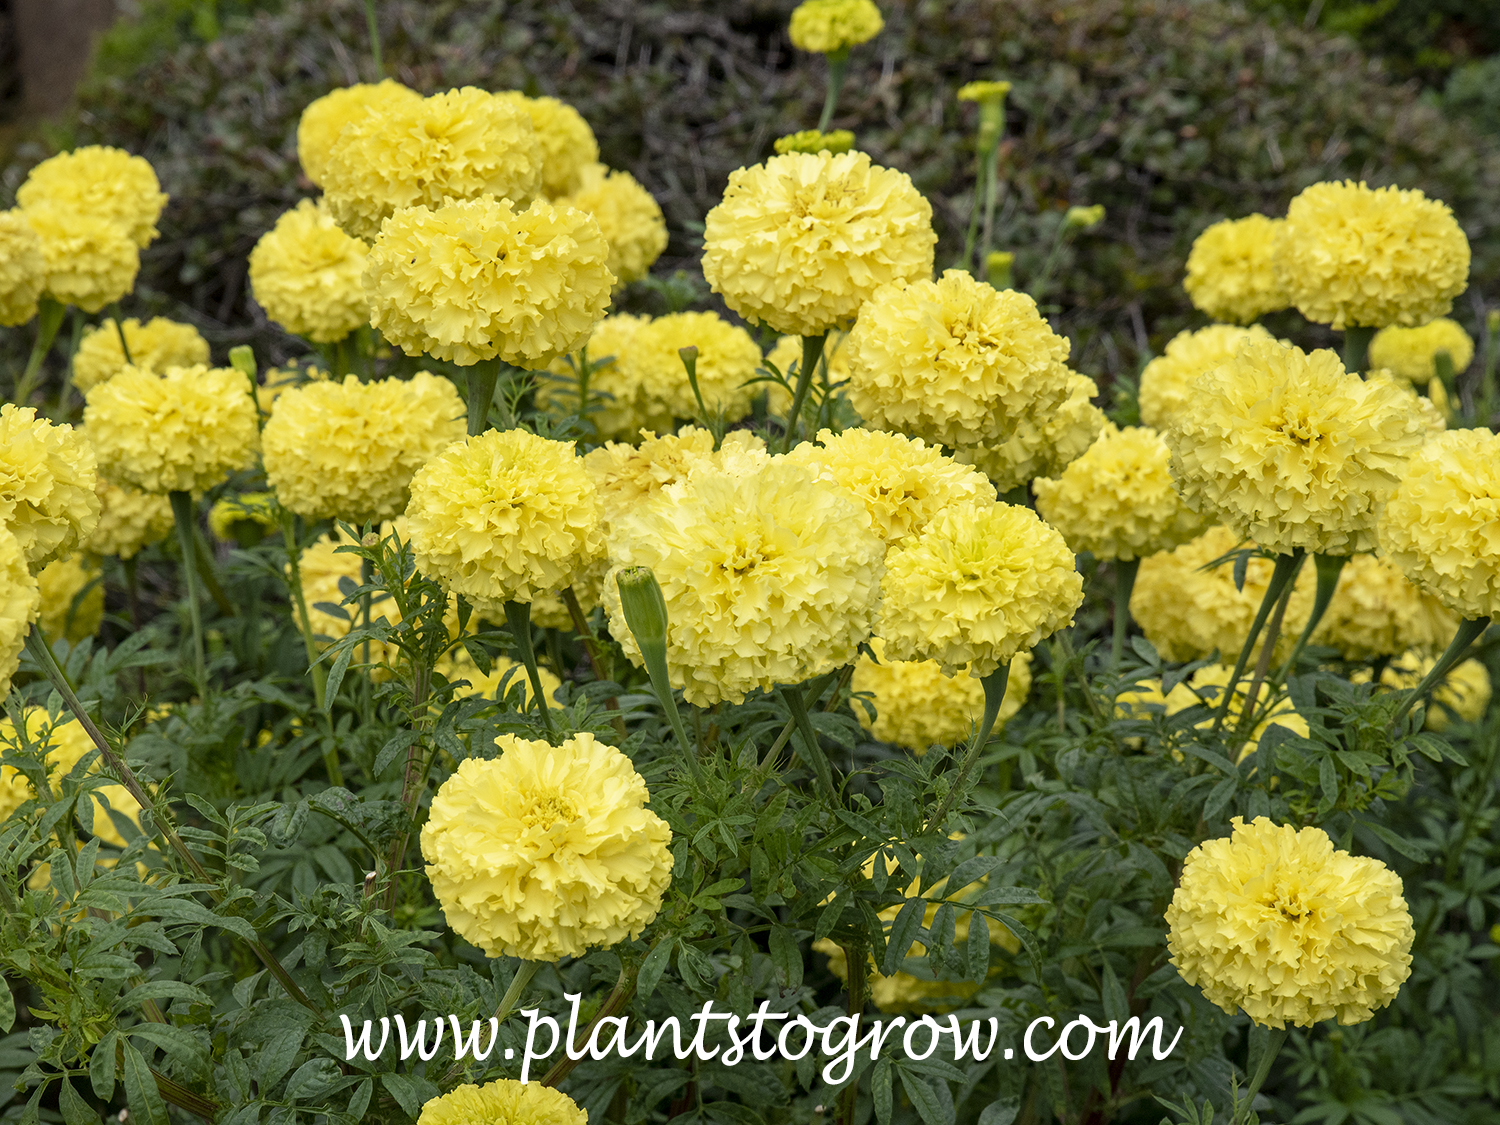 'Key Lime Marigold' (Tagetes erecta)
A tall African type Marigold with large yellow flowers.